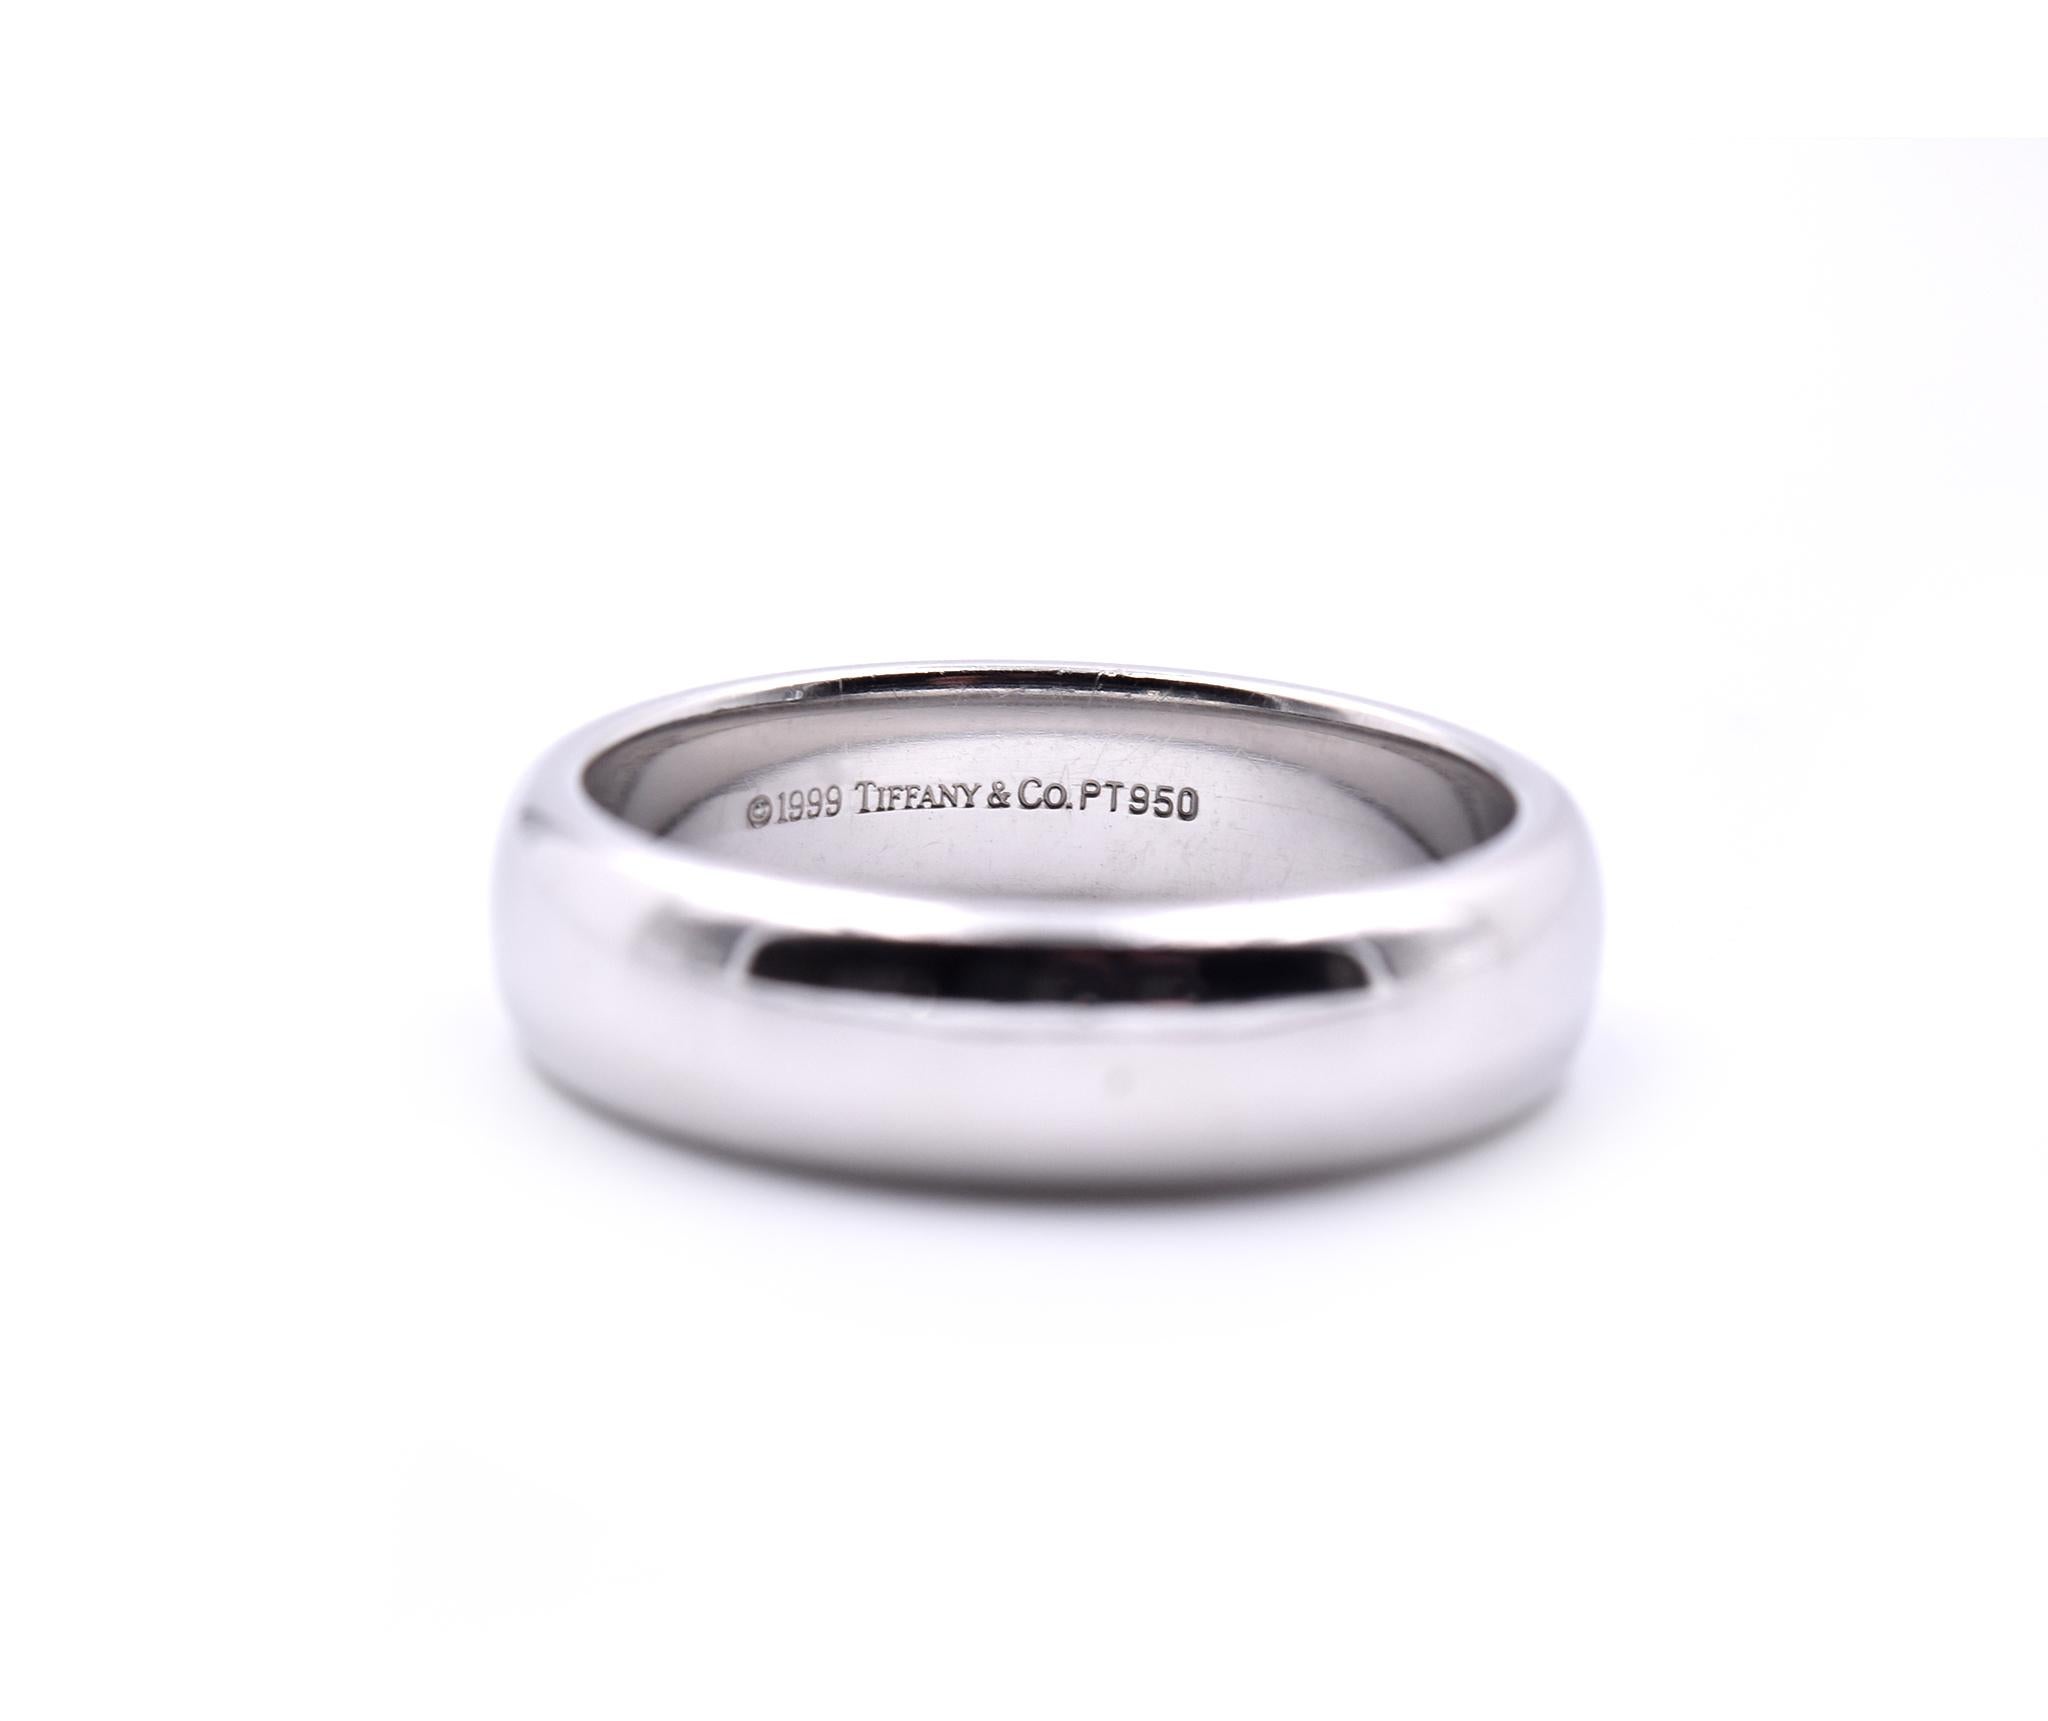 Designer: Tiffany & Co.
Material: Platinum
Ring Size: 10 ¼ 
Dimensions: band measures 6.03mm in width
Weight: 16.25 grams	
